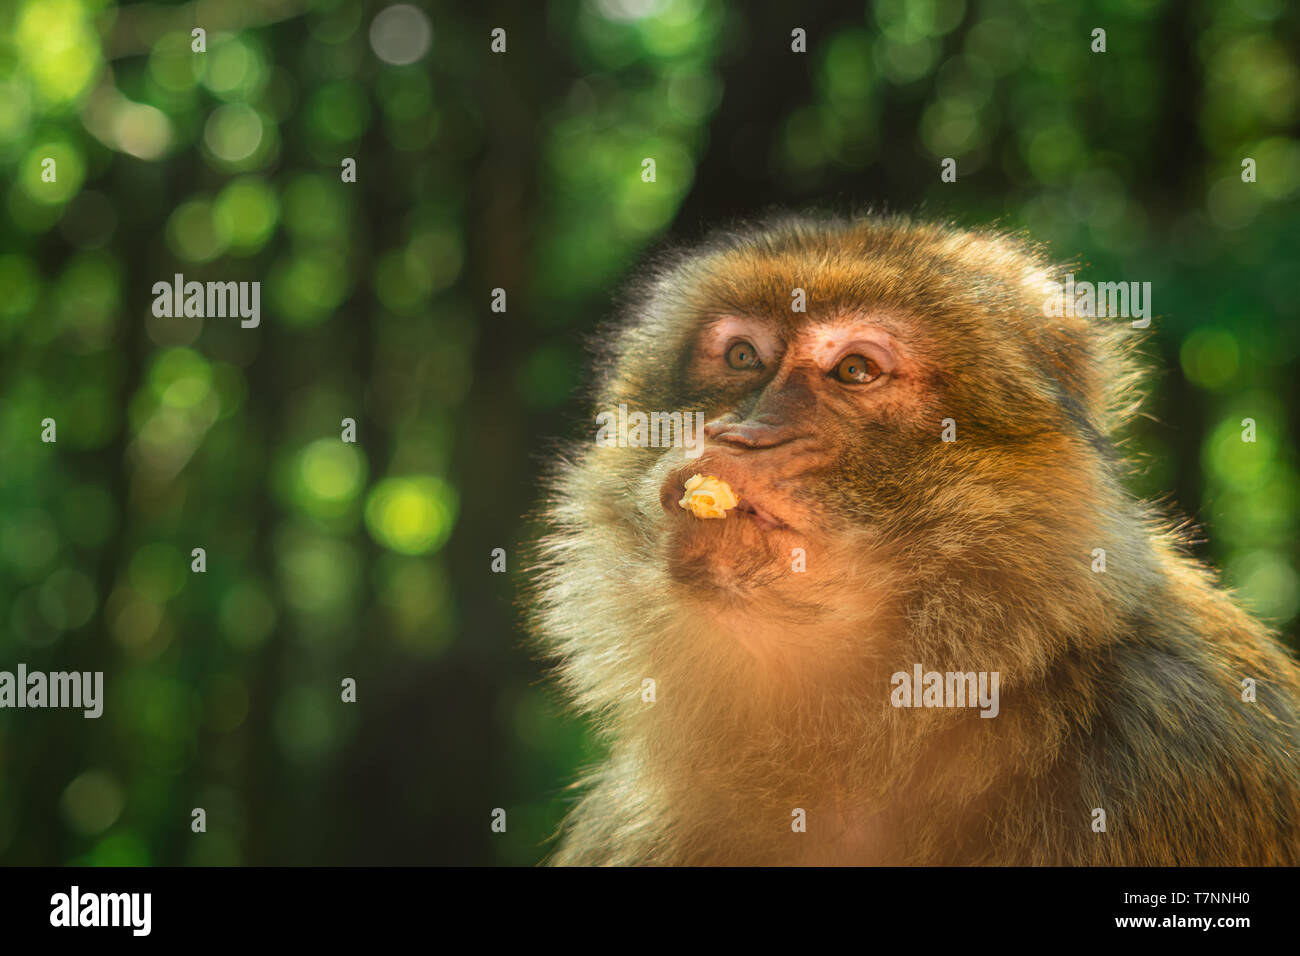 funny monkey eating popcorn, ape portrait with green bokeh copy space Stock Photo